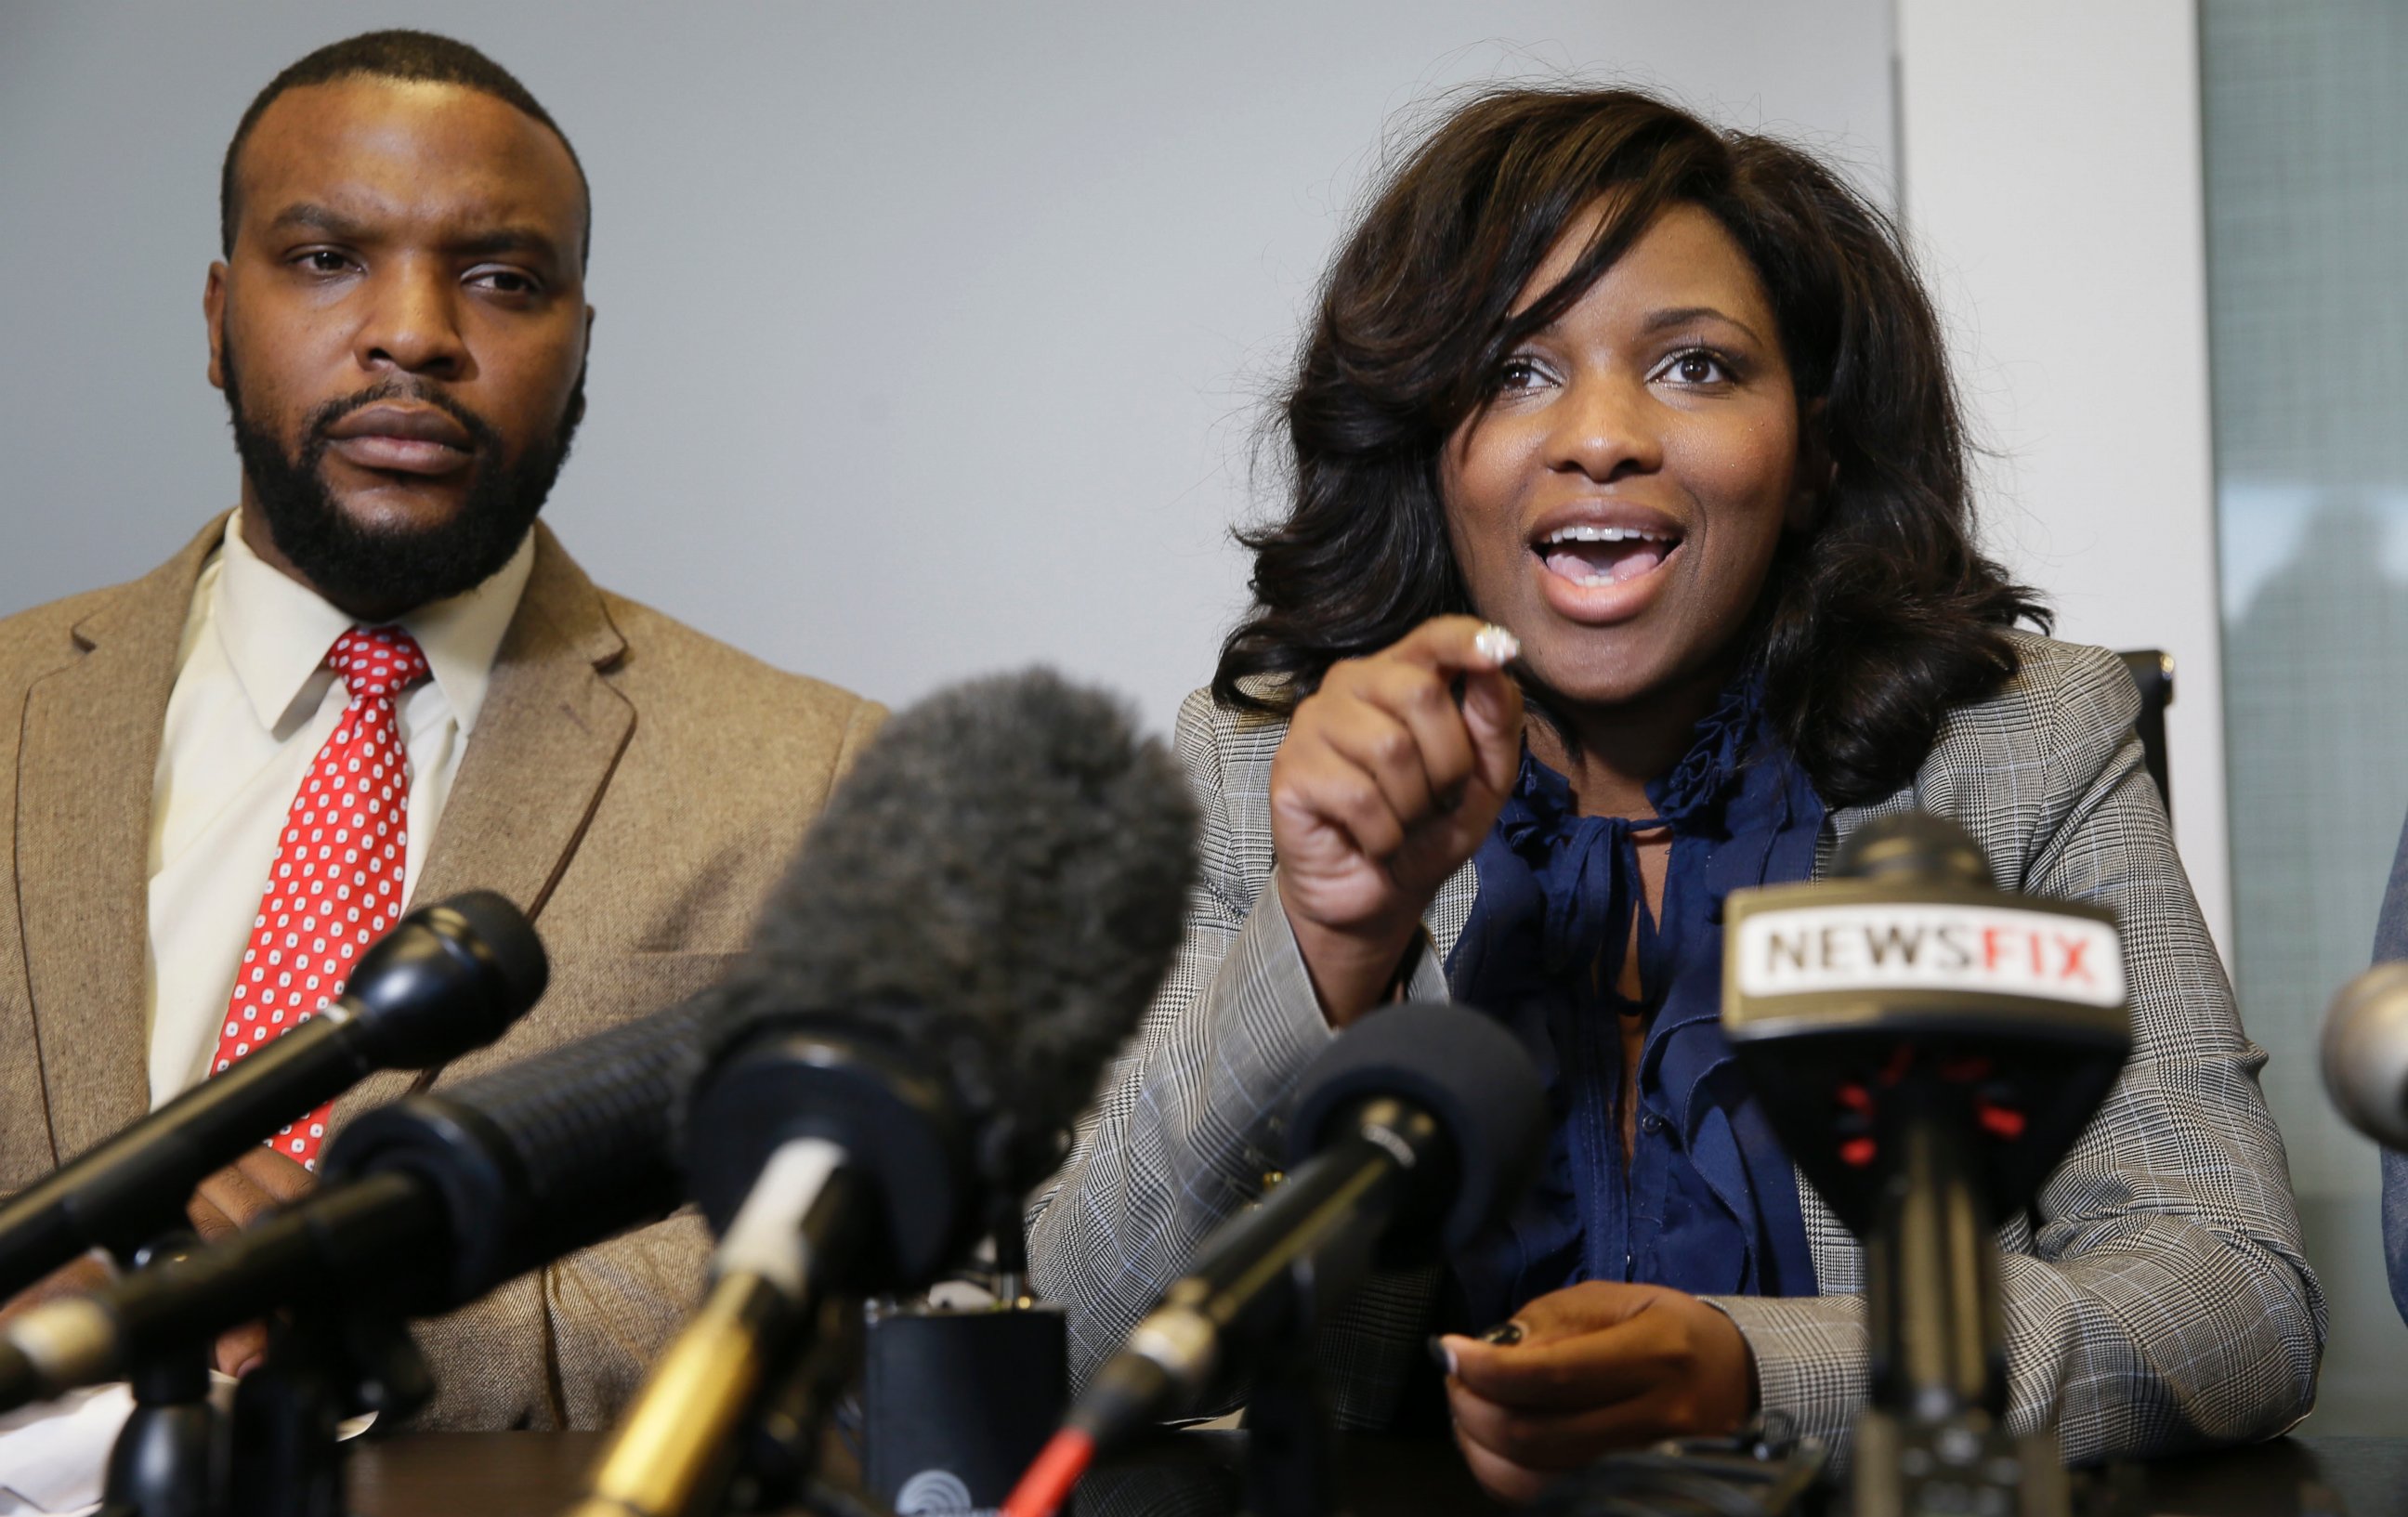 PHOTO: Attorney Jasmine Crockett, right, speaks while her law partner attorney Lee Merritt listens during a news conference in Dallas, Thursday, Jan. 26, 2017.